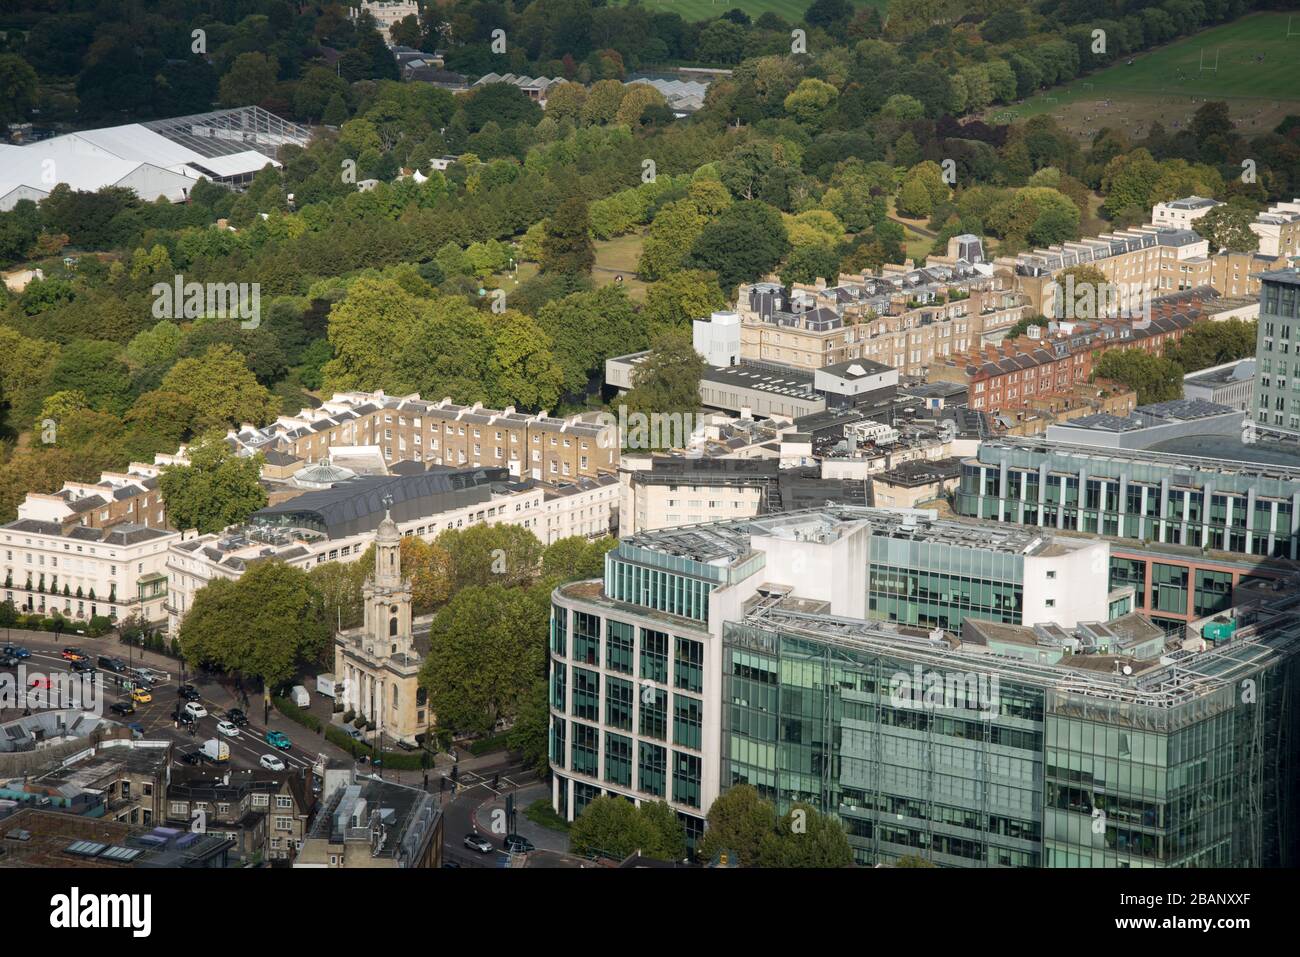 Aerial View of Regents Place One Marylebone Regents Park RCP London from the BT Tower, 60 Cleveland St, Fitzrovia, London W1T 4JZ Stock Photo